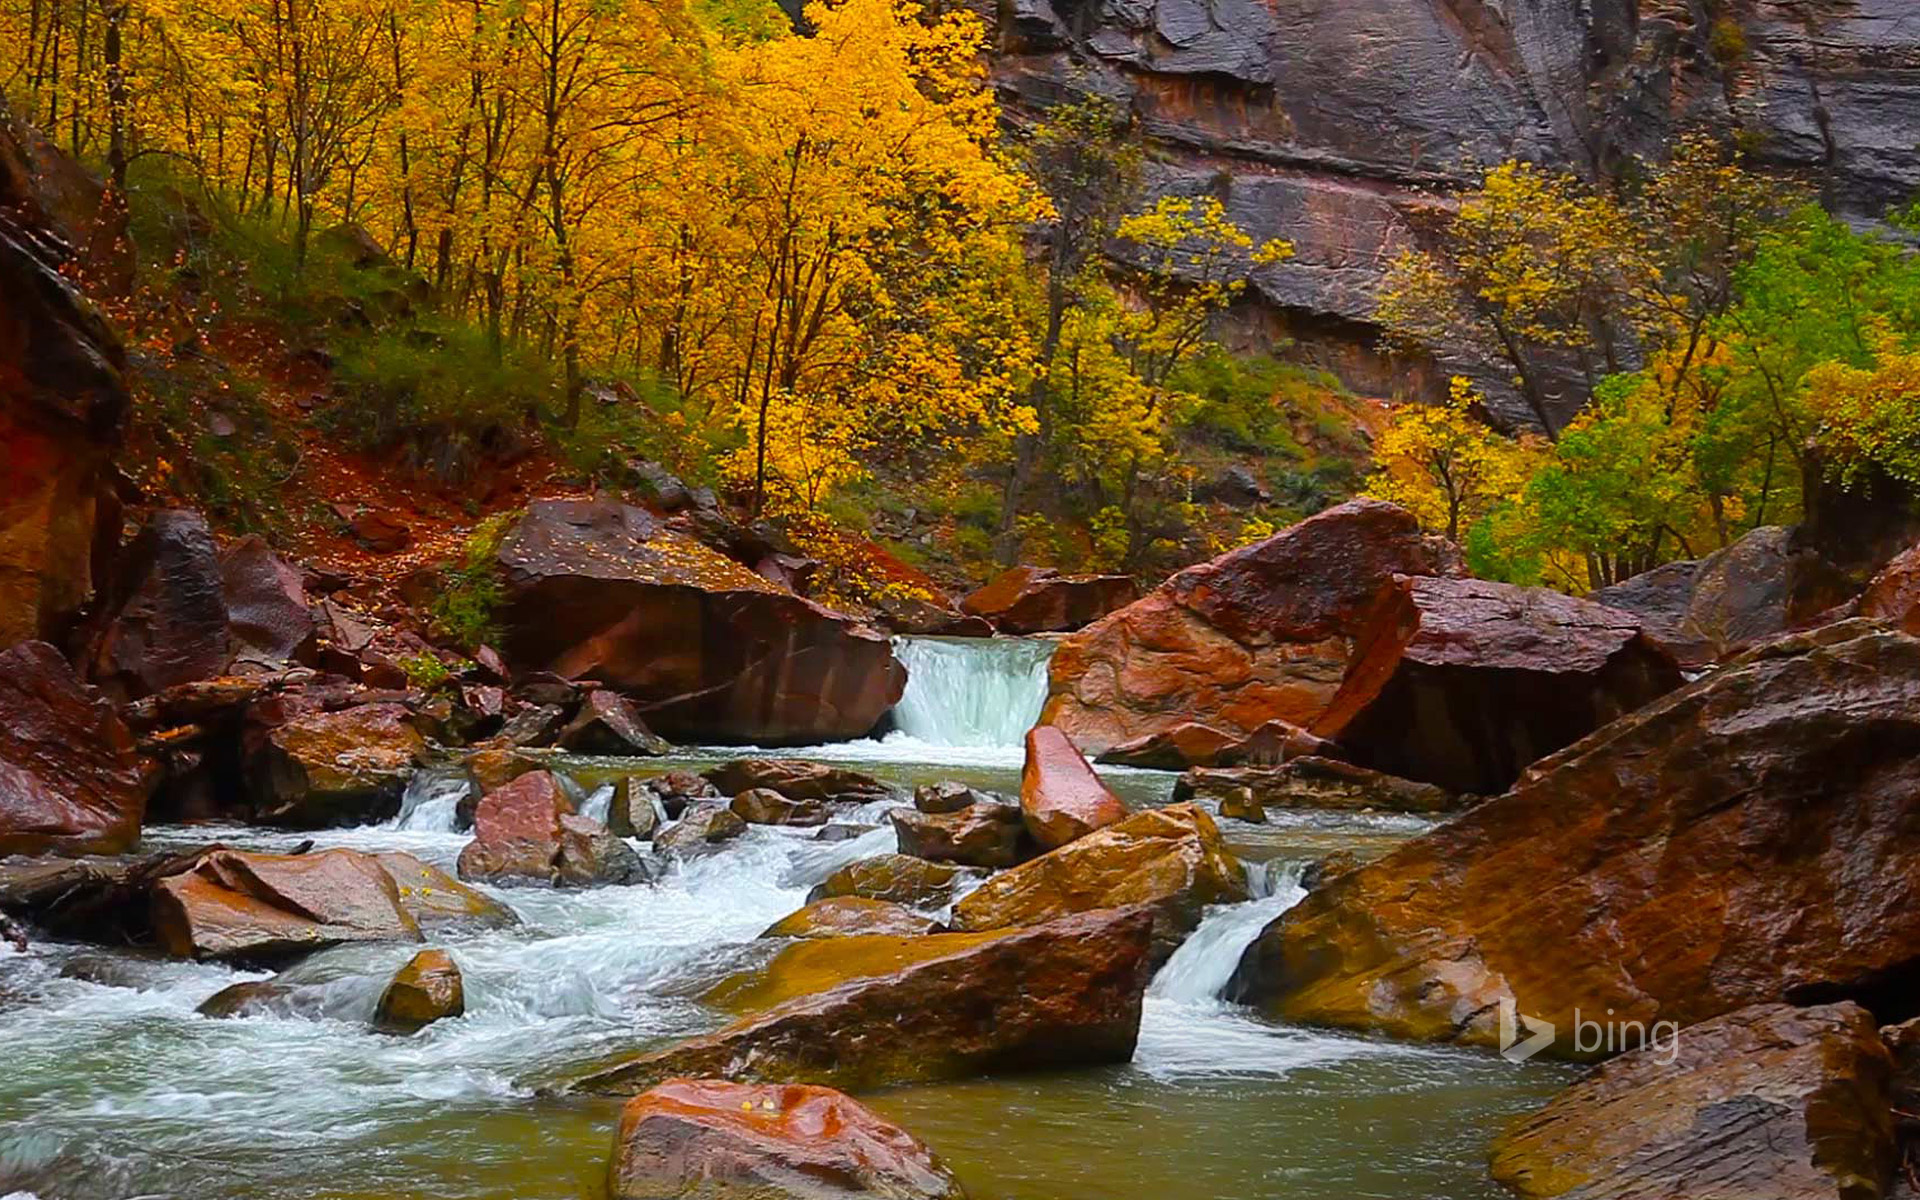 North Fork of the Virgin River, Zion Canyon, Utah